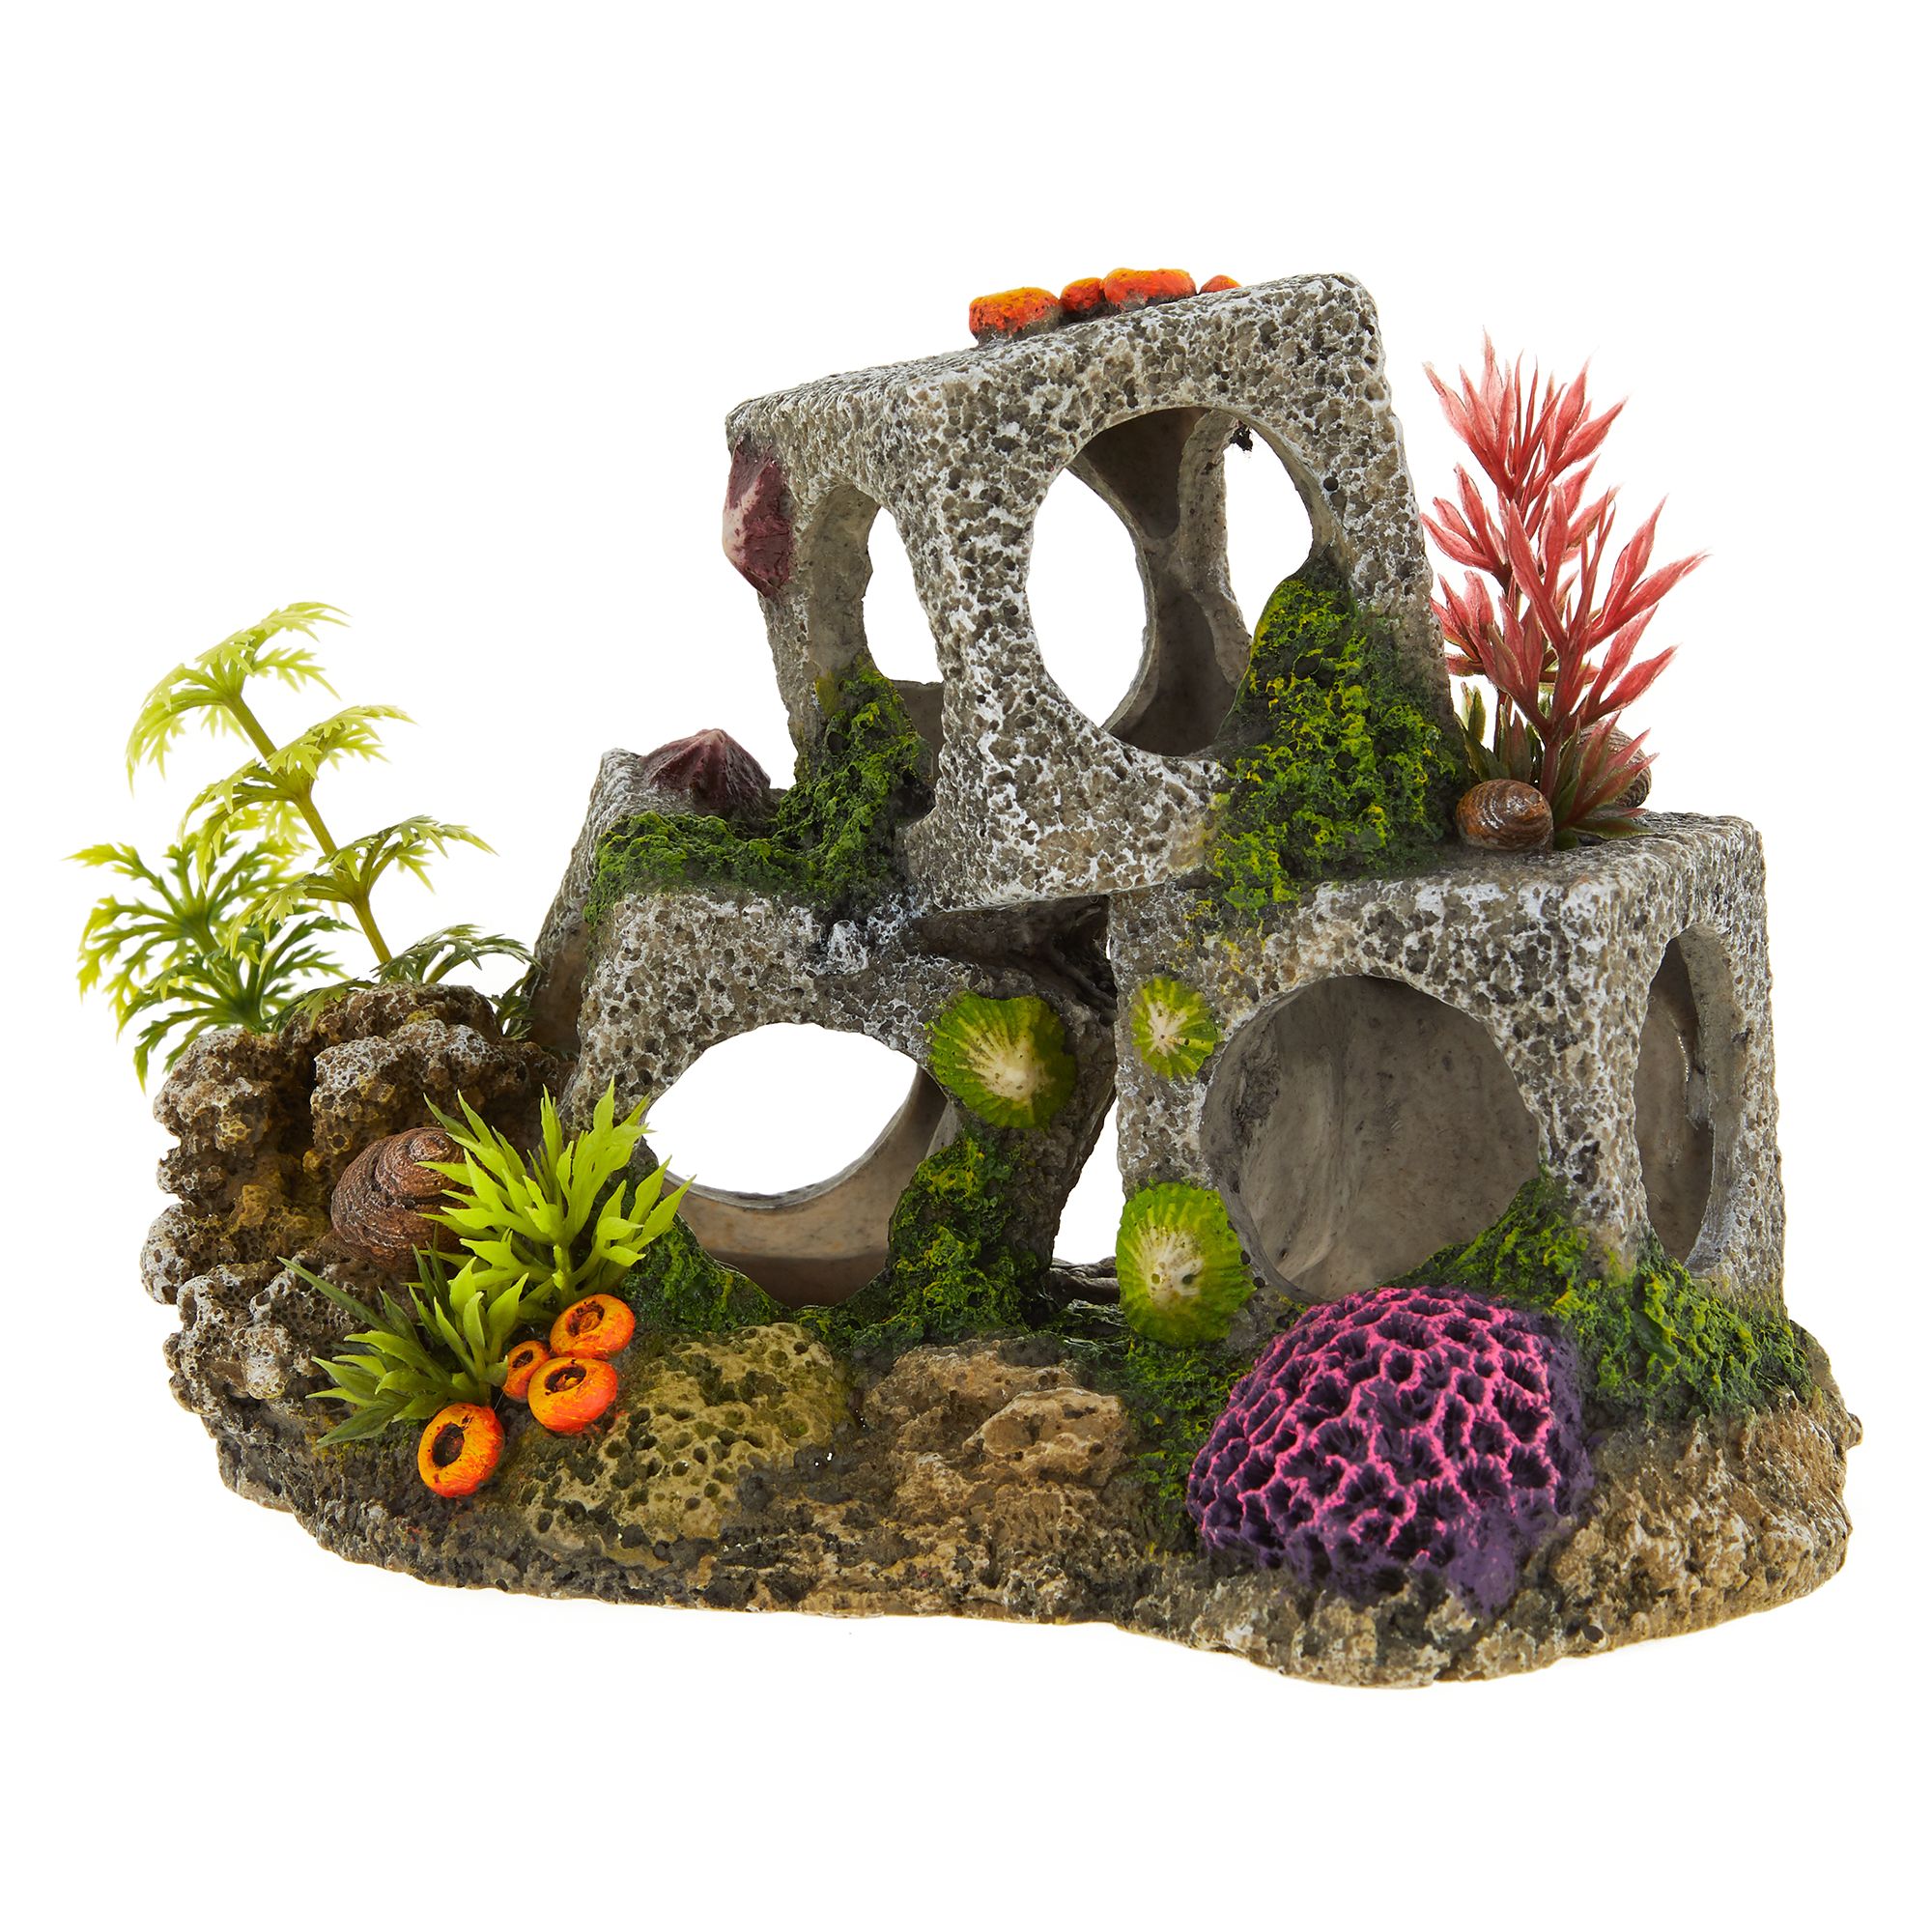 Buy High Quality Glass Fish Tanks Online at the Cheapest Price